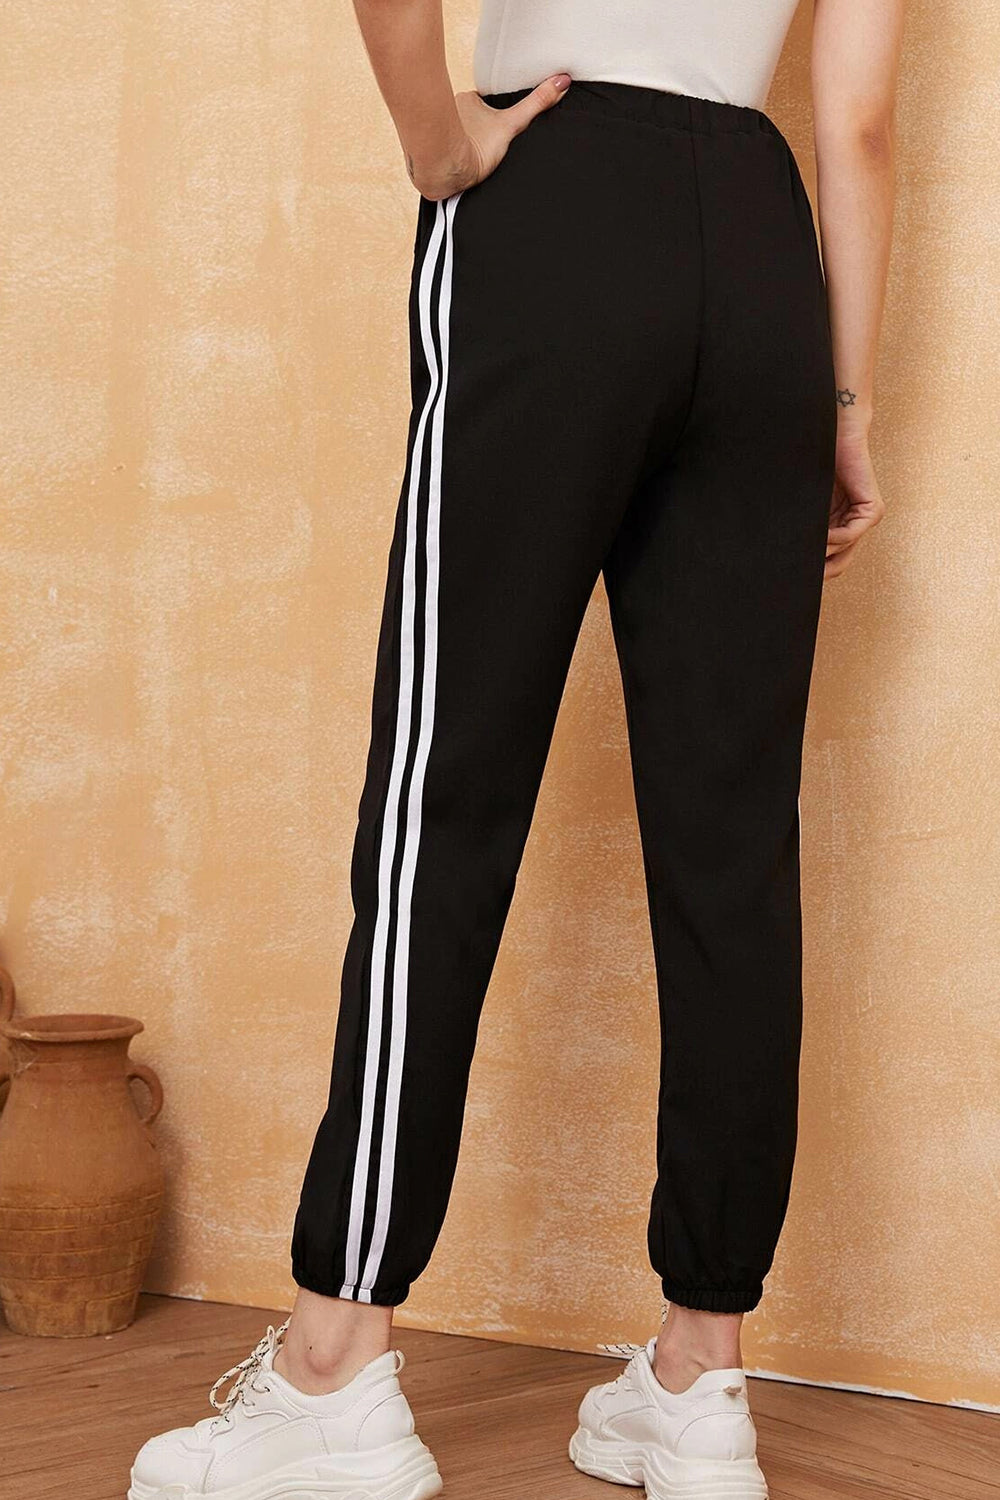 Buy Fleece Striped Jogger Men's Jeans & Pants from Buyers Picks. Find  Buyers Picks fashion & more at DrJays.com